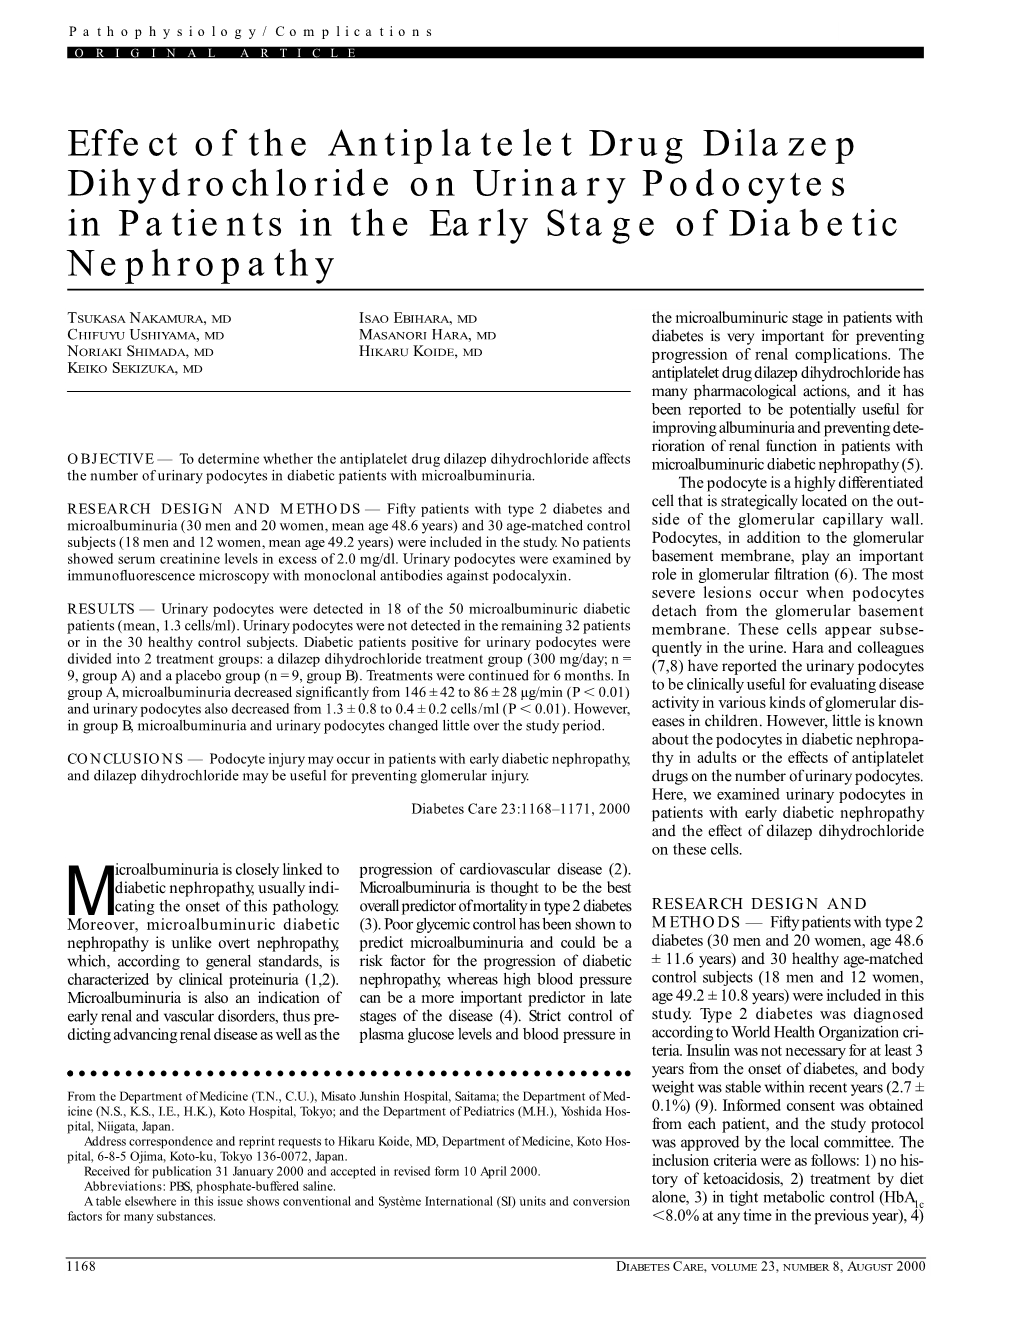 Effect of the Antiplatelet Drug Dilazep Dihydrochloride on Urinary Podocytes in Patients in the Early Stage of Diabetic Nephropathy